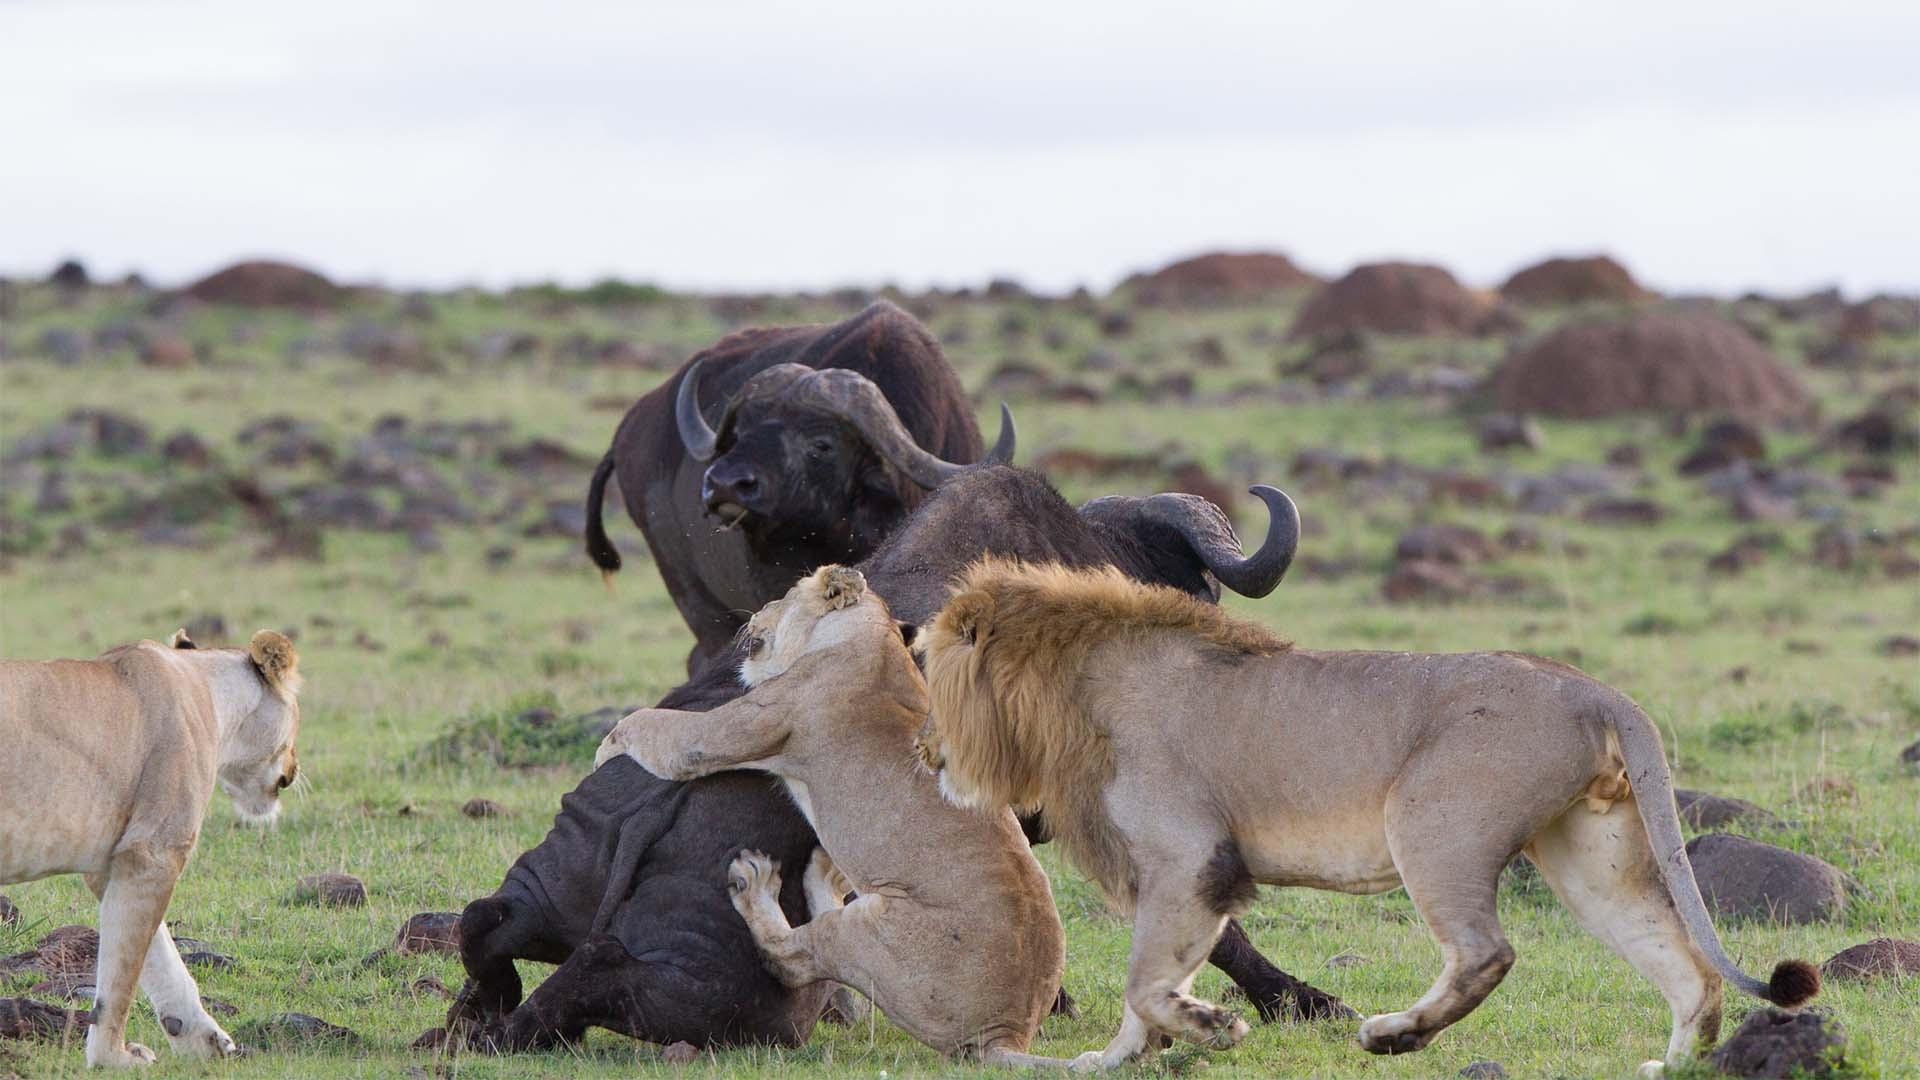 Image of lions from the Marsh Pride hunting buffalo.